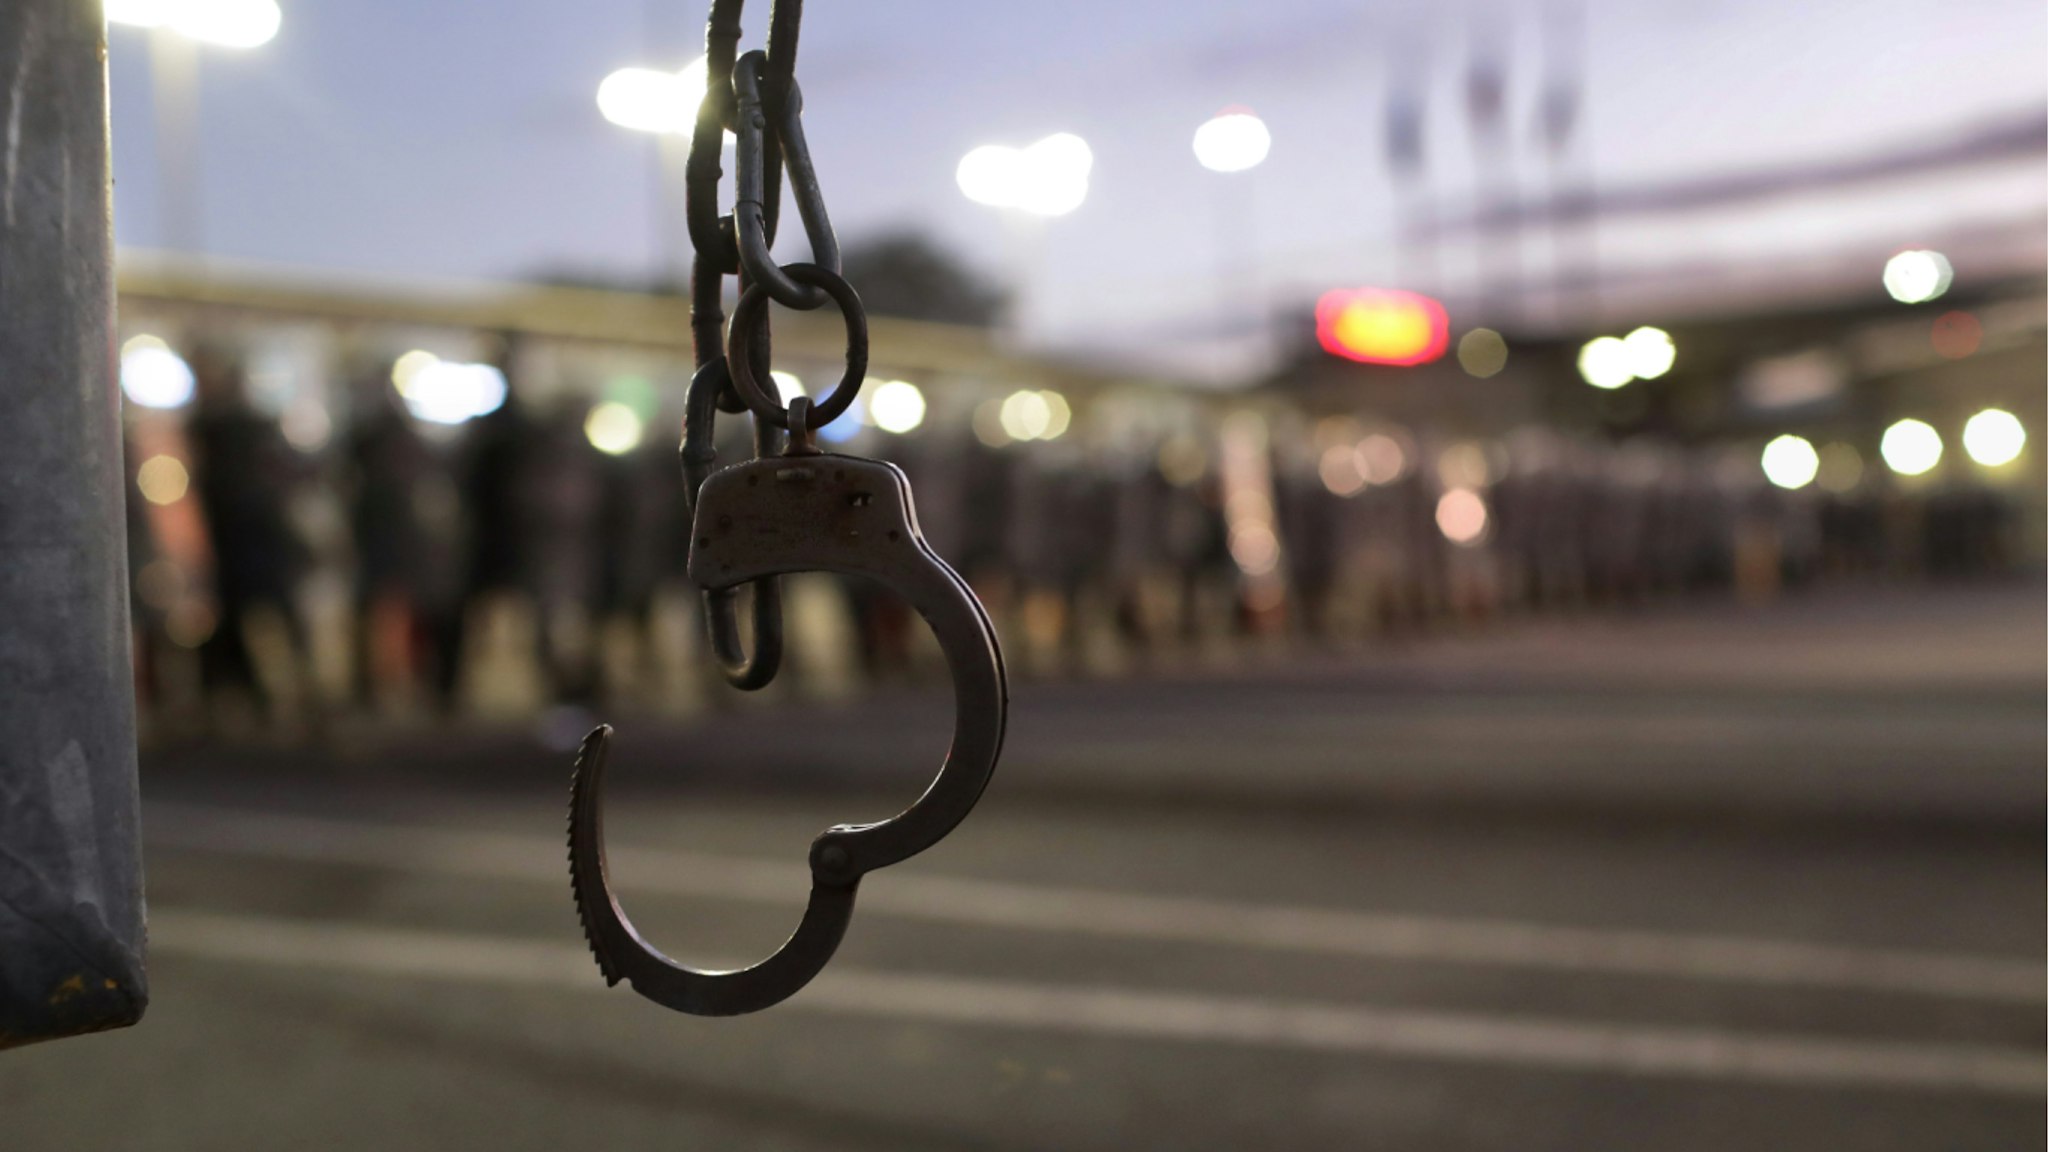 A handcuff attached to a fence is seen as U.S. Customs and Border Protection (CBP) officers block the Otay Mesa port of entry from Mexico into the United States early on December 1, 2018 as seen from Tijuana, Mexico.